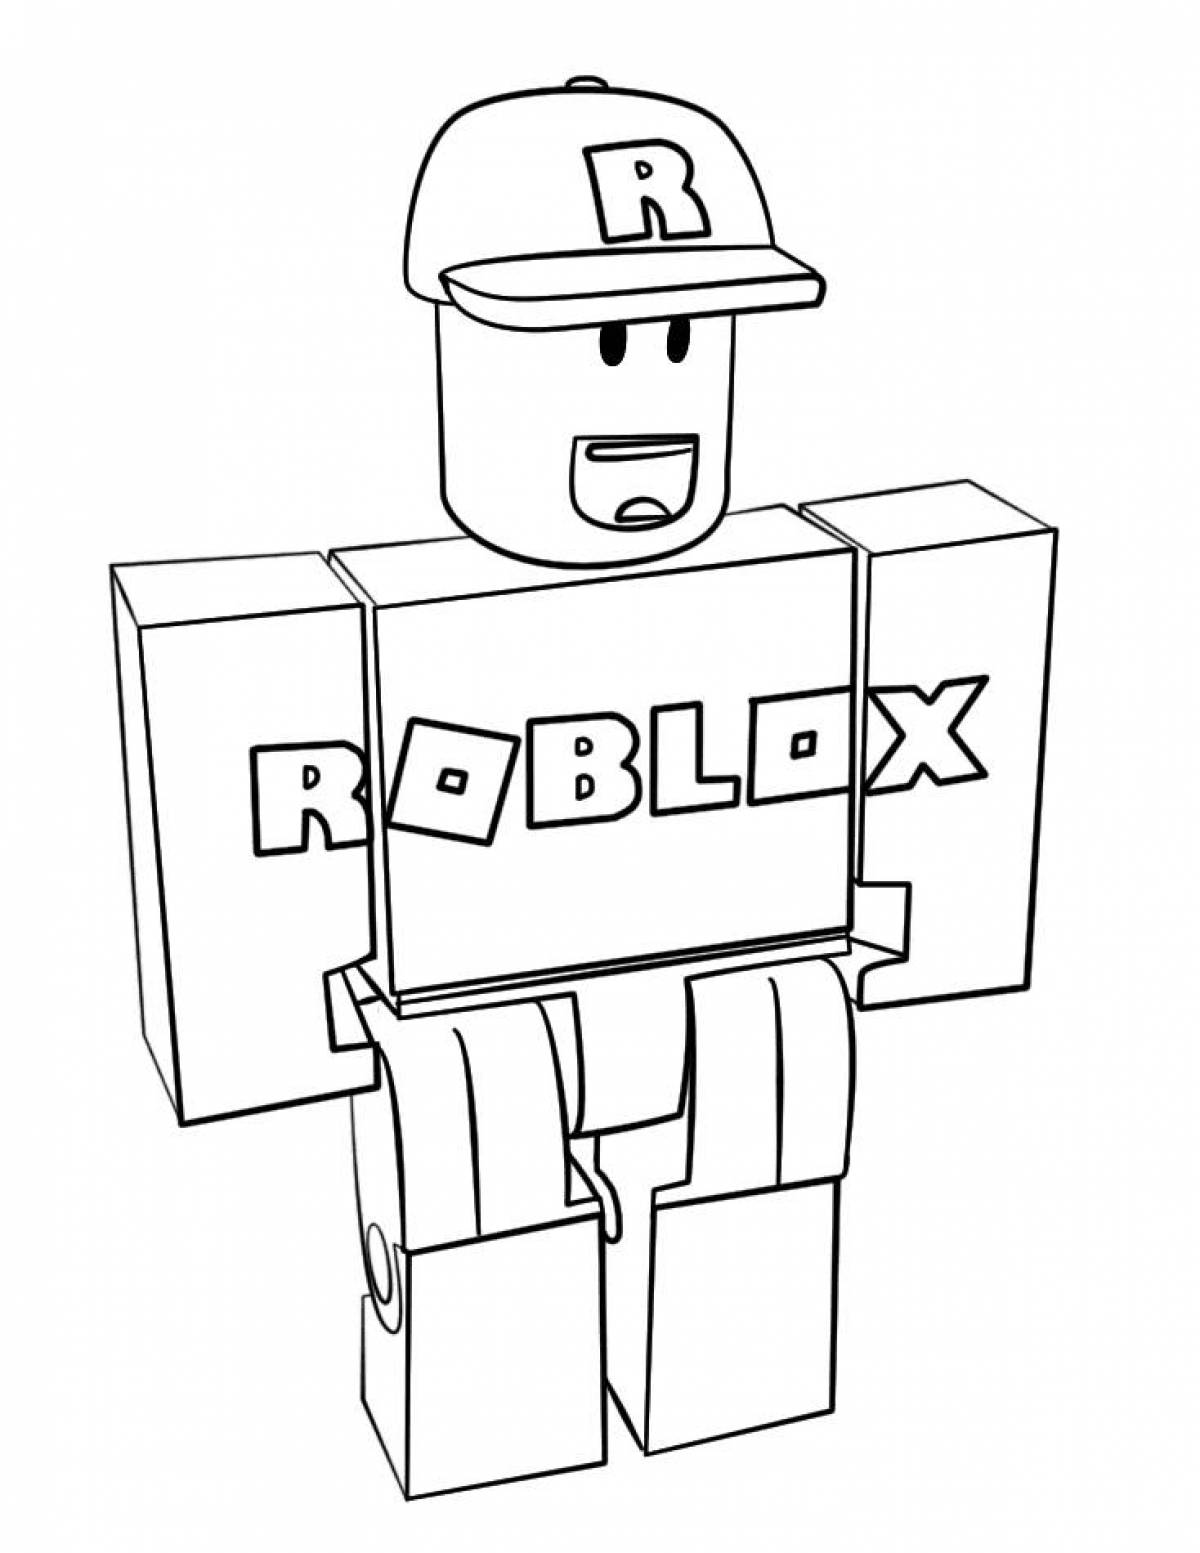 Colorful roblox coloring page for little kids